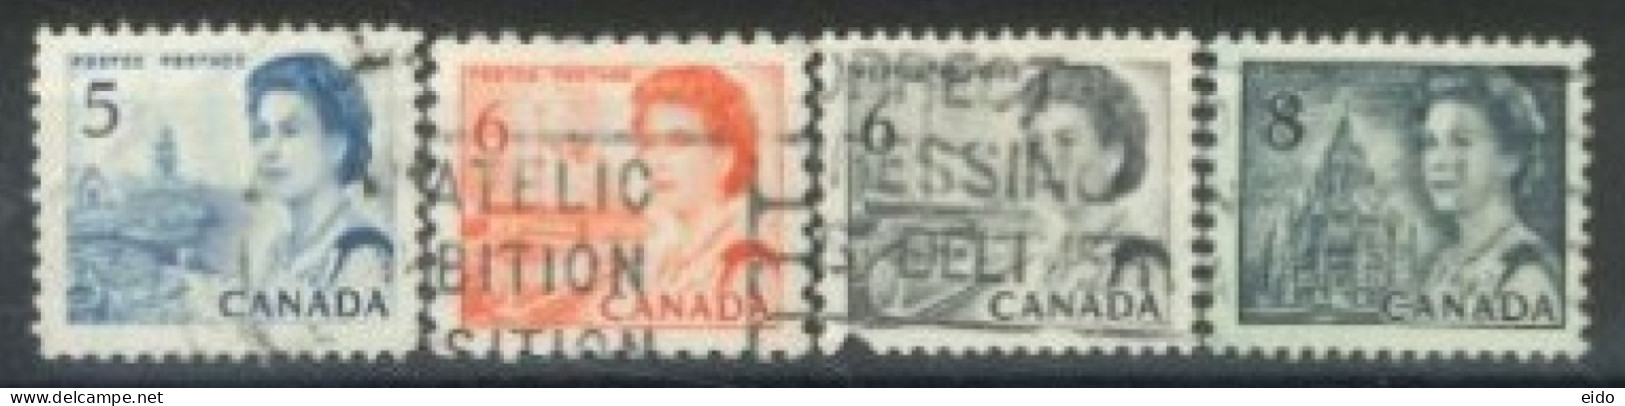 CANADA - 1967, QUEEN ELIZABETH II NORTHERN LIGHTS & DOG TEAM STAMPS SET OF 4, USED. - Used Stamps